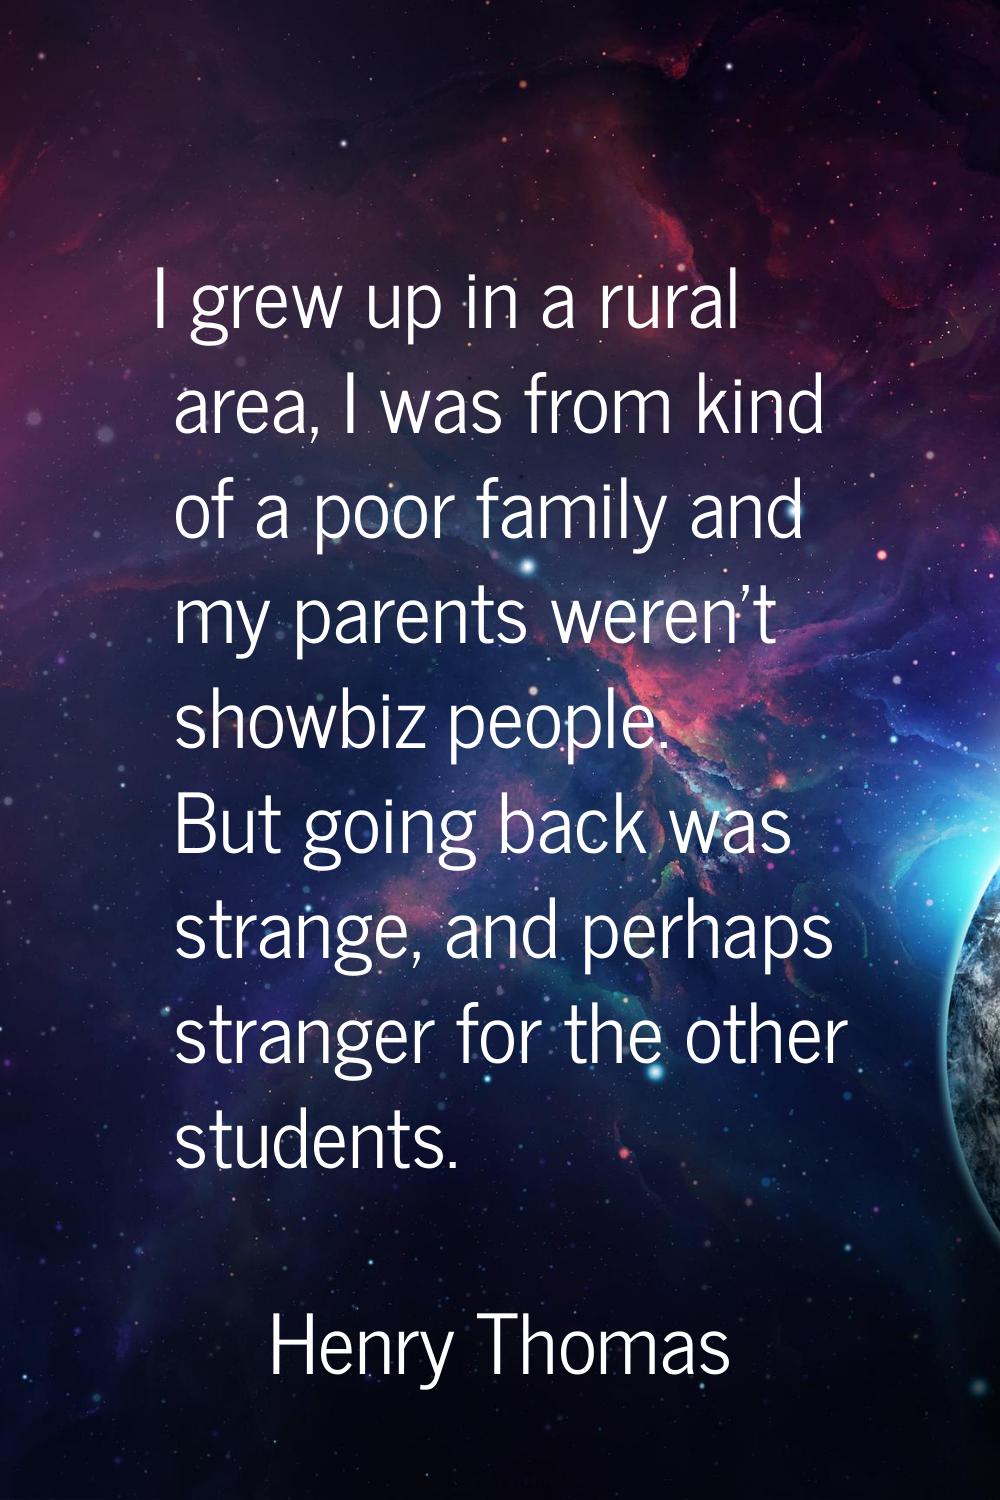 I grew up in a rural area, I was from kind of a poor family and my parents weren't showbiz people. 